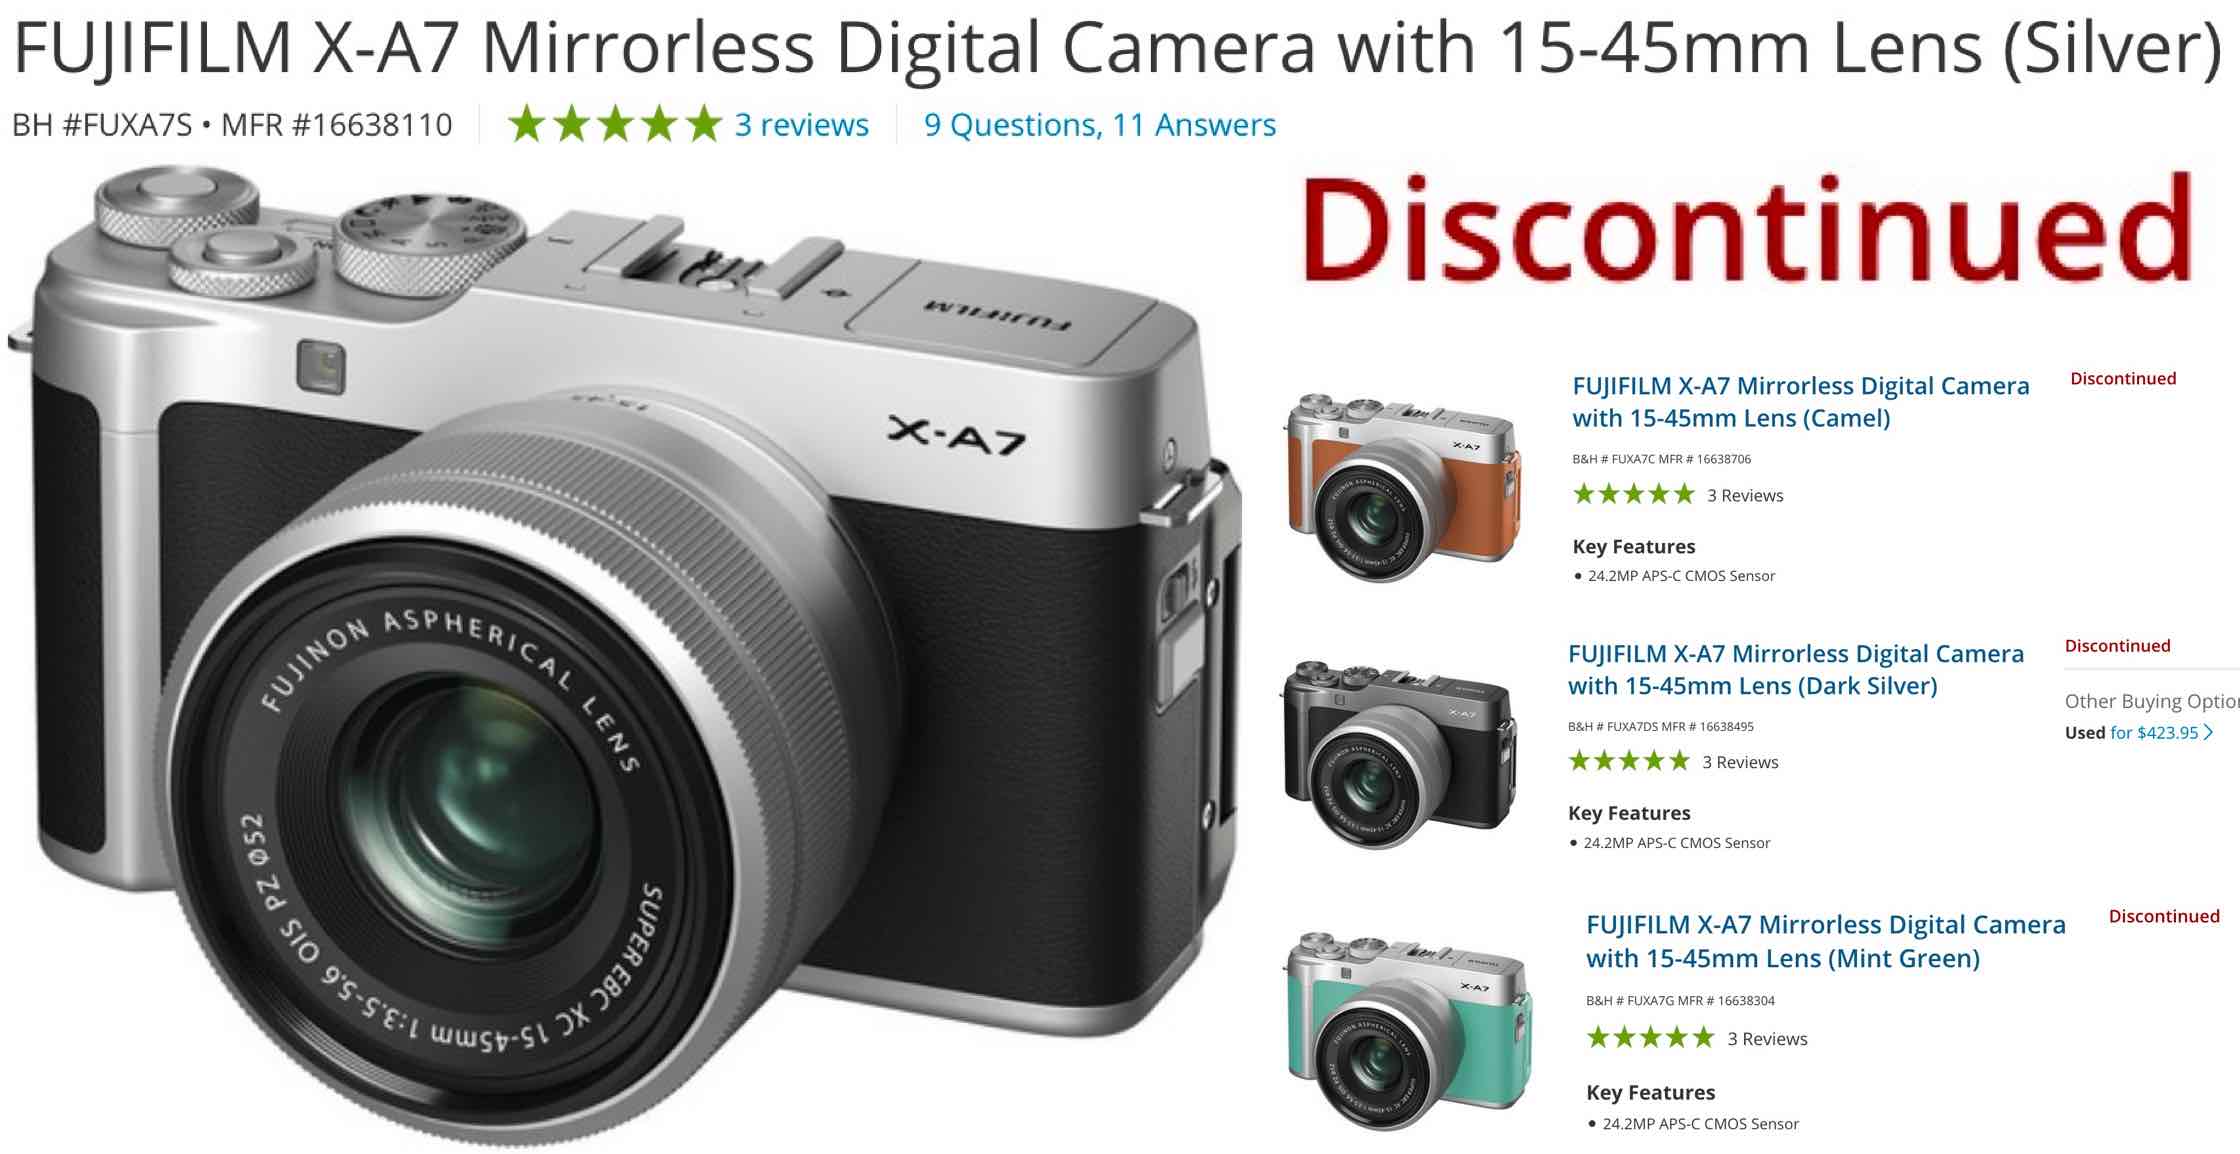 Fujifilm X-A7 Discontinued after Only 11 Months: Fujifilm X-A8